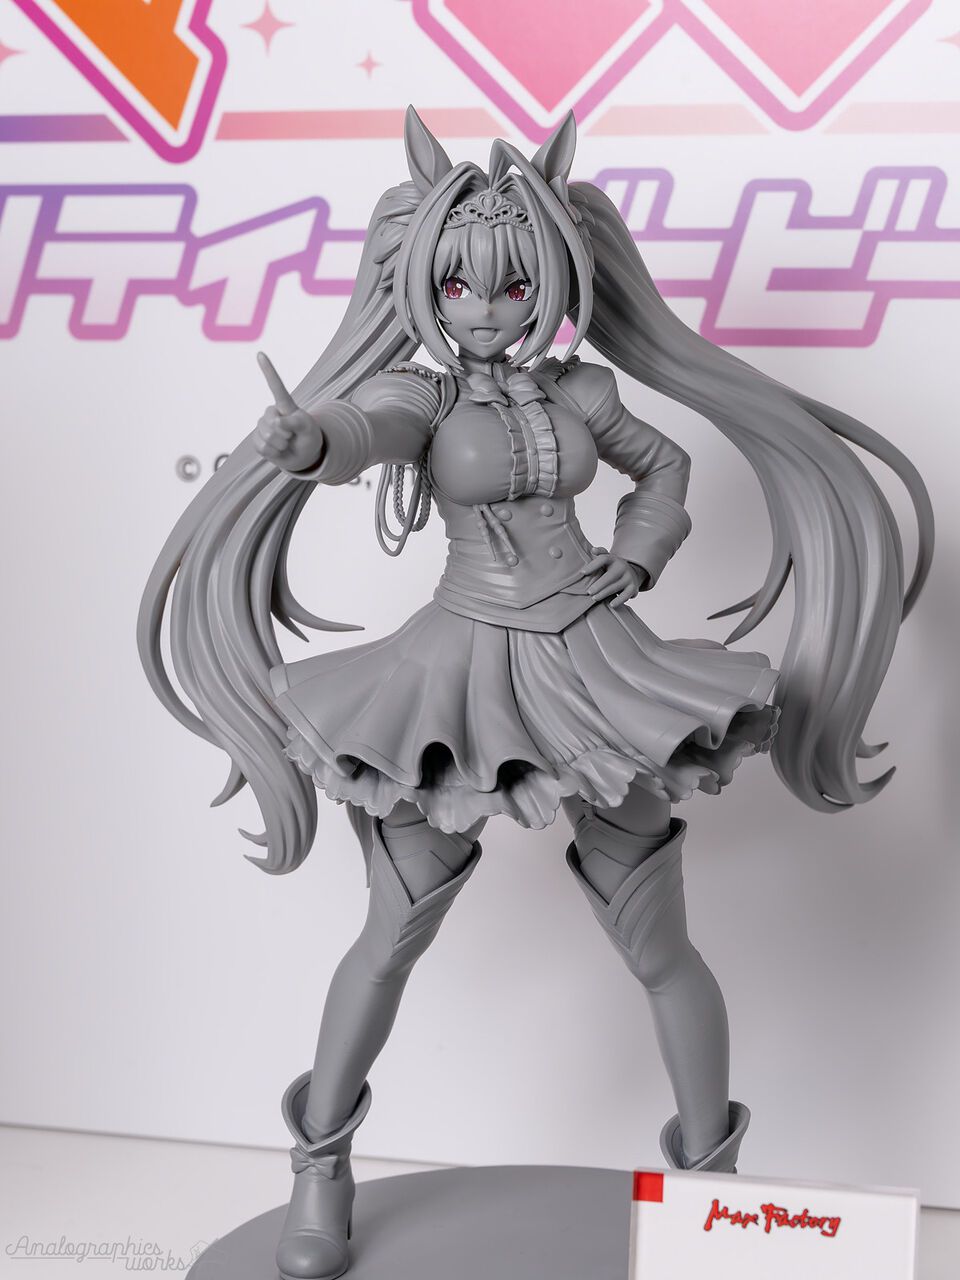 When I look at the prototype of the figure of [Uma Musume] Daiwa Scarlet from below, the thighs and spats are too erotic 4